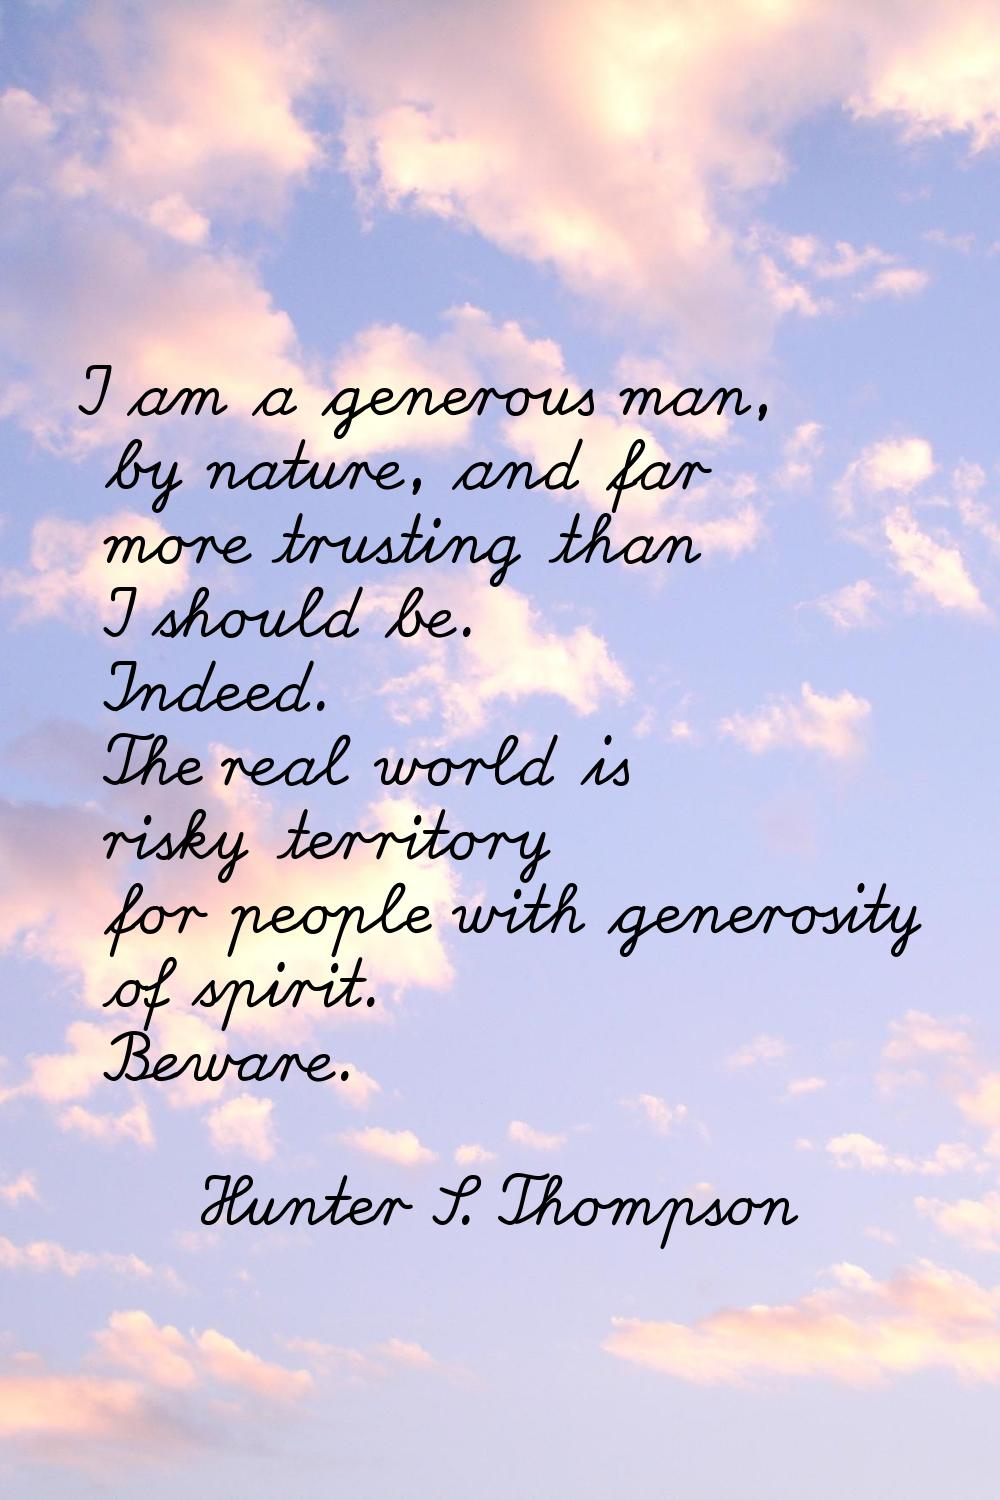 I am a generous man, by nature, and far more trusting than I should be. Indeed. The real world is r